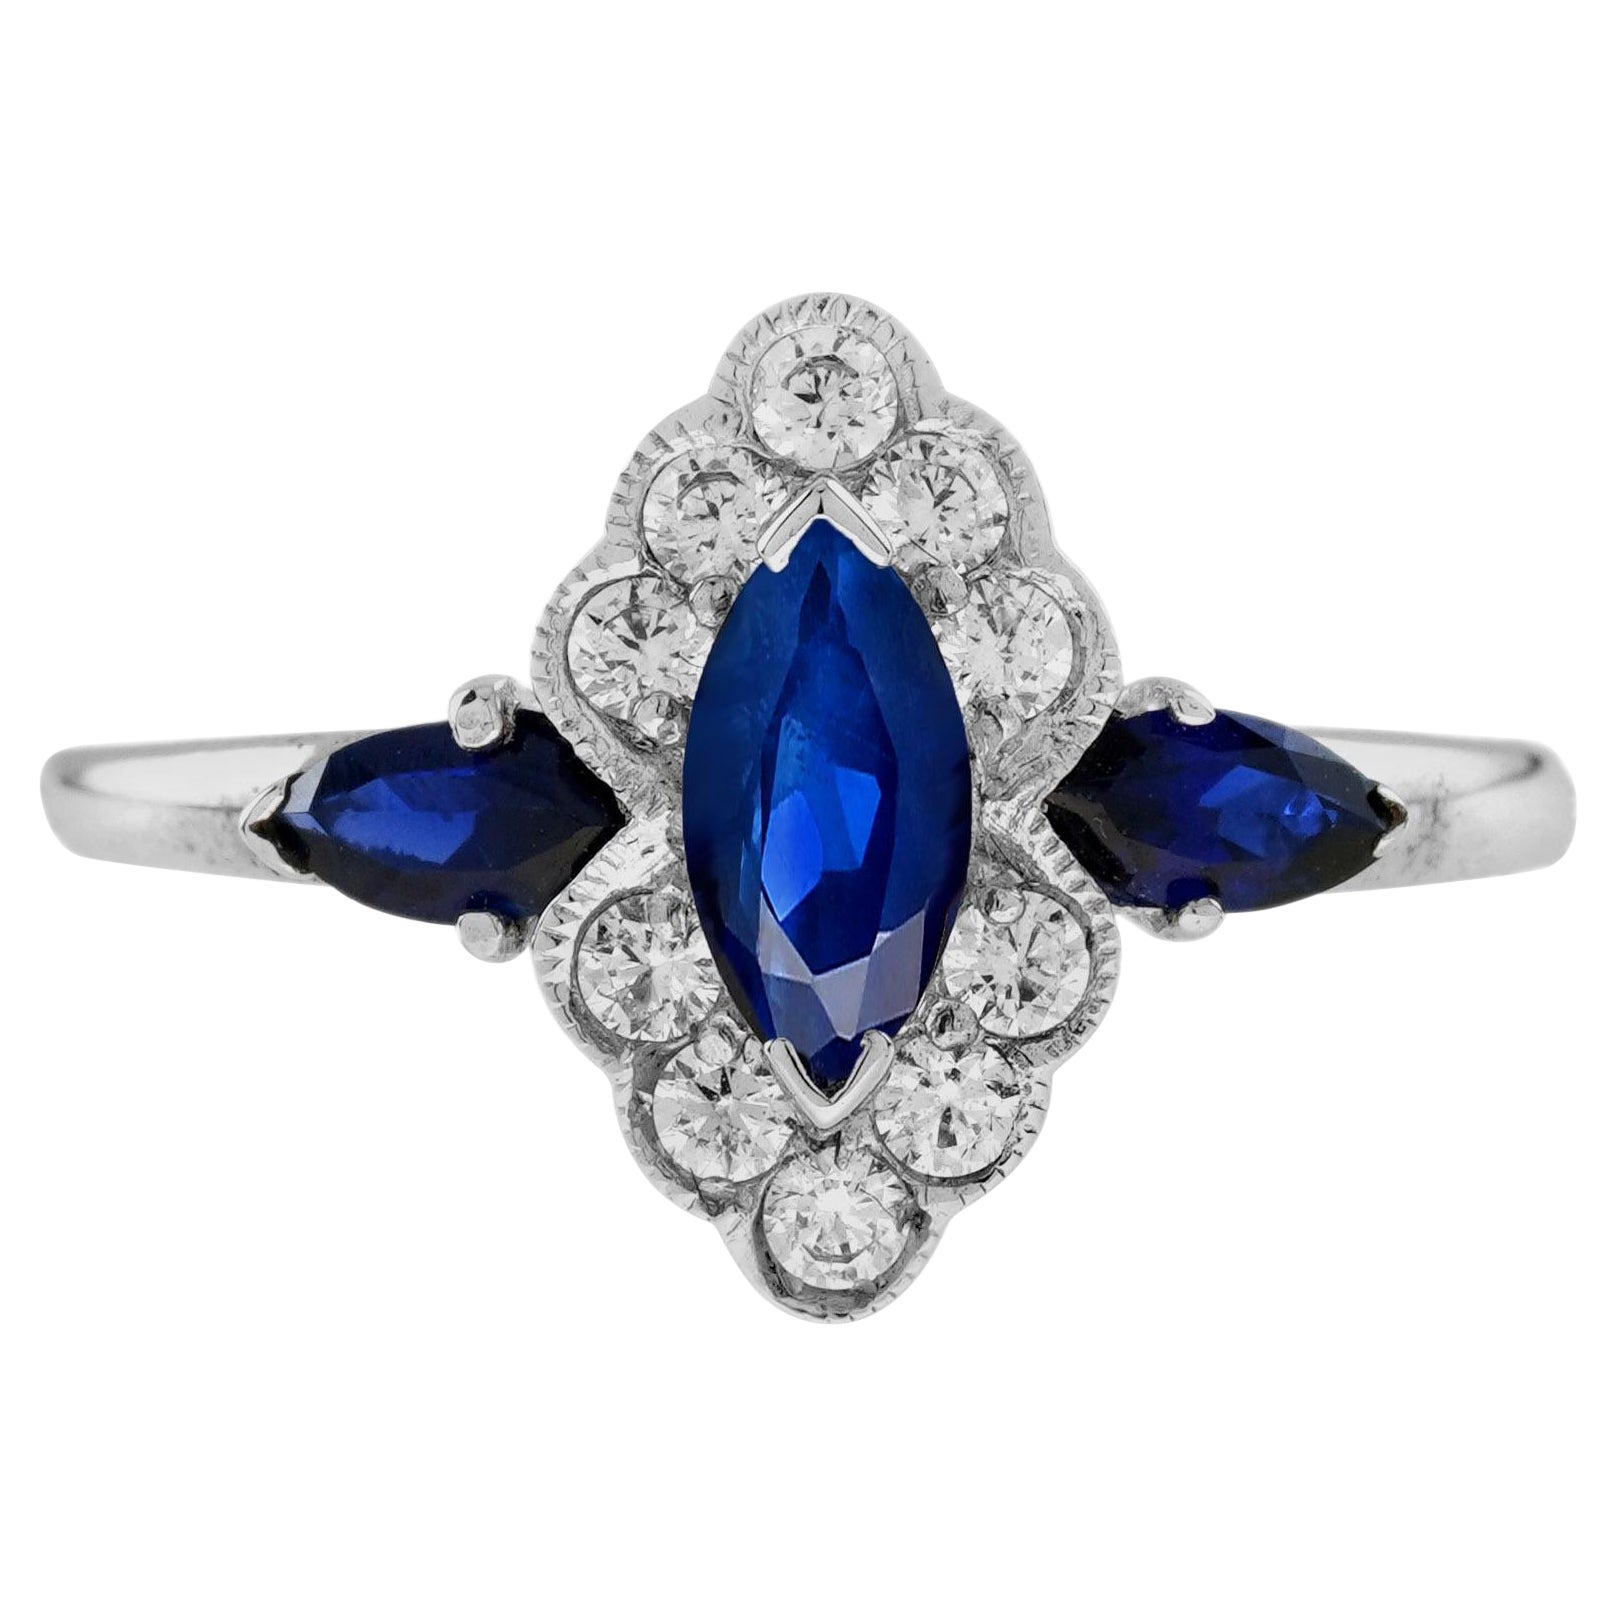 For Sale:  Marquise Blue Sapphire and Diamond Halo Ring in 14K White Gold